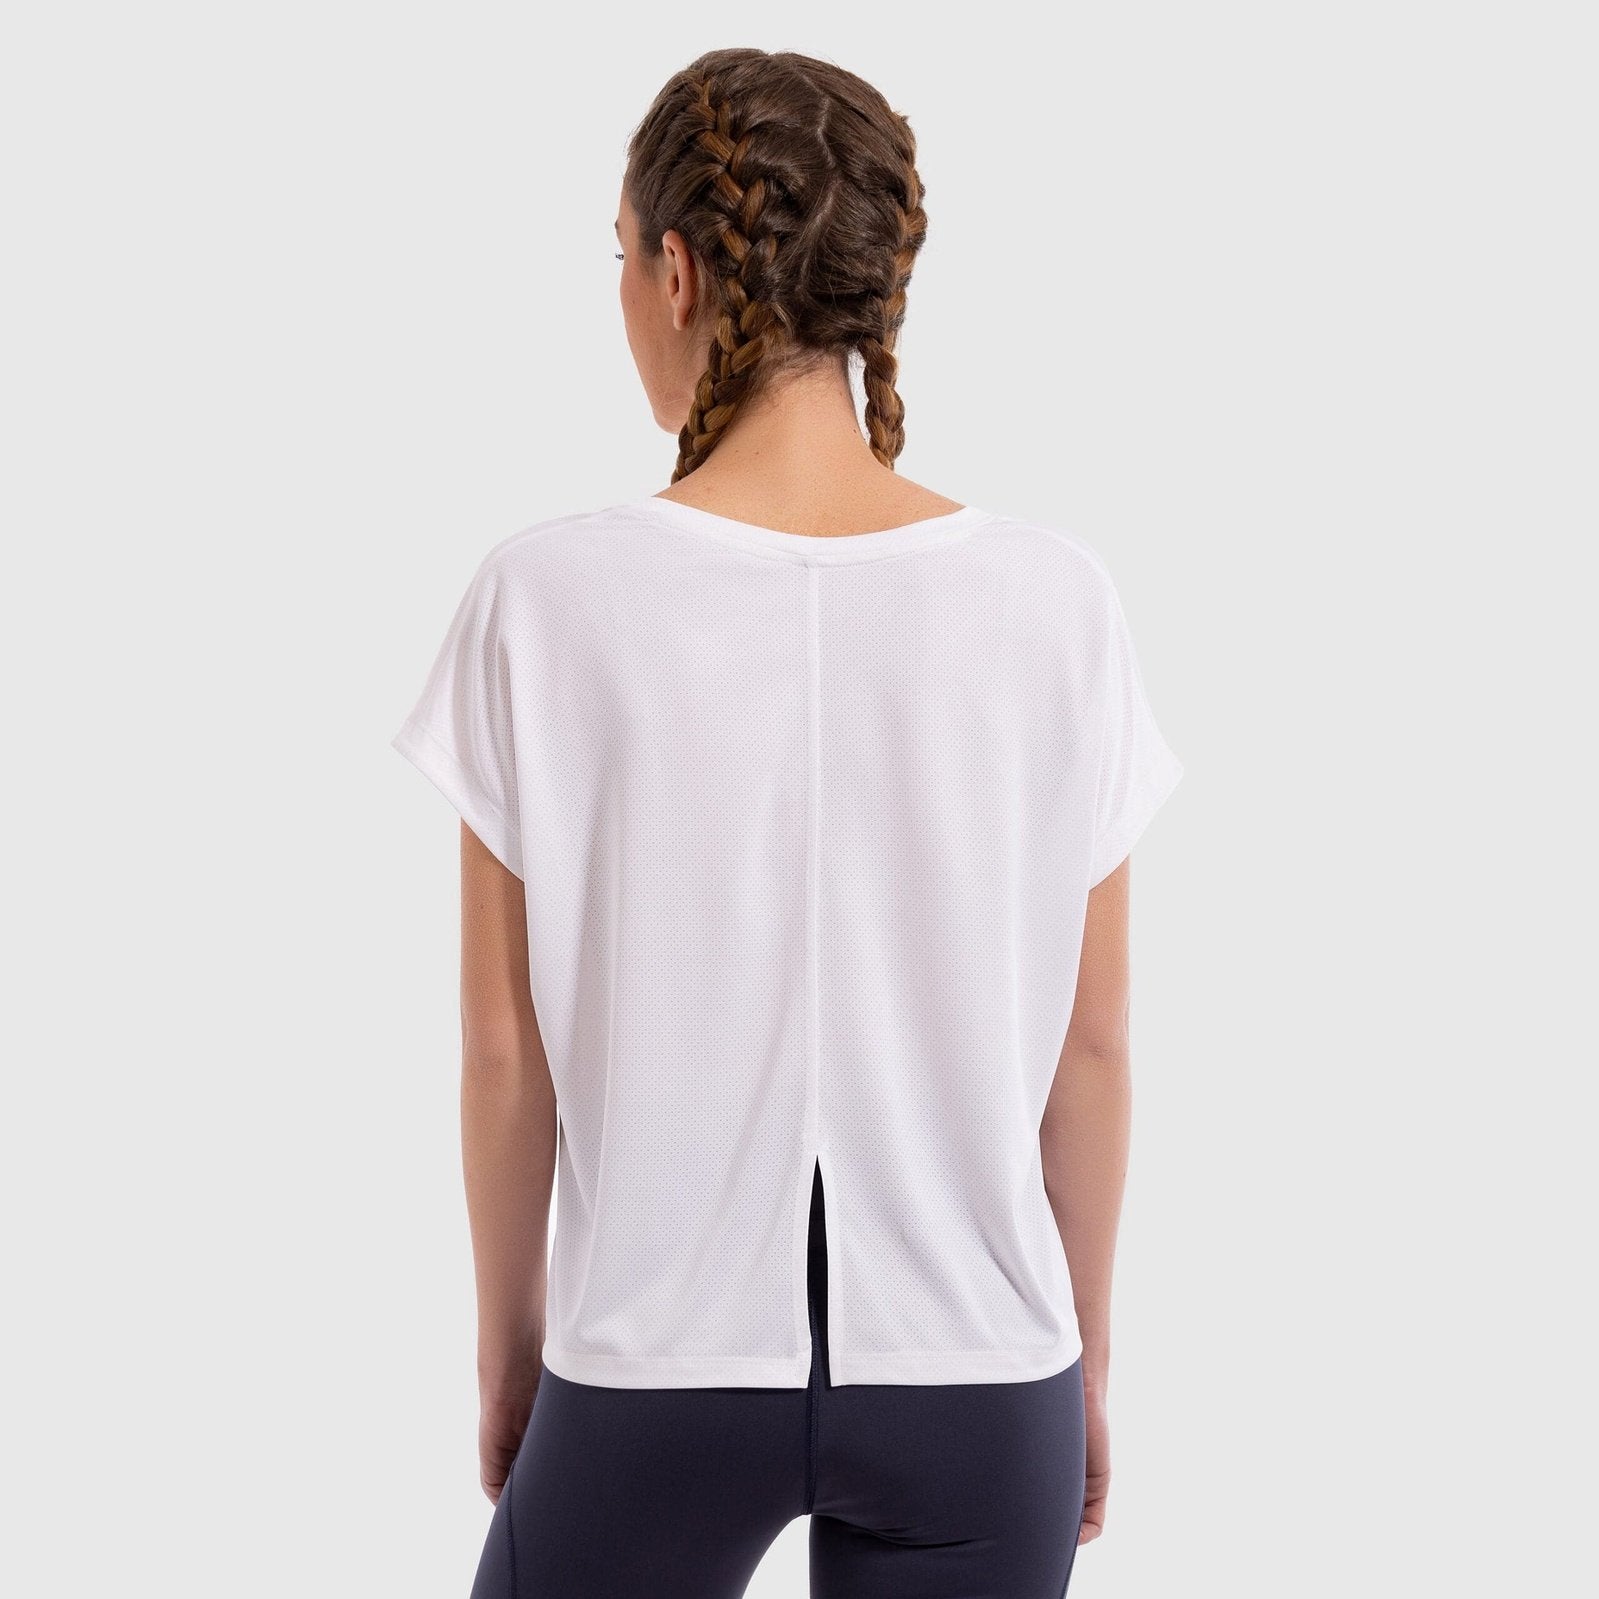 Unravel Tie Back Top in White